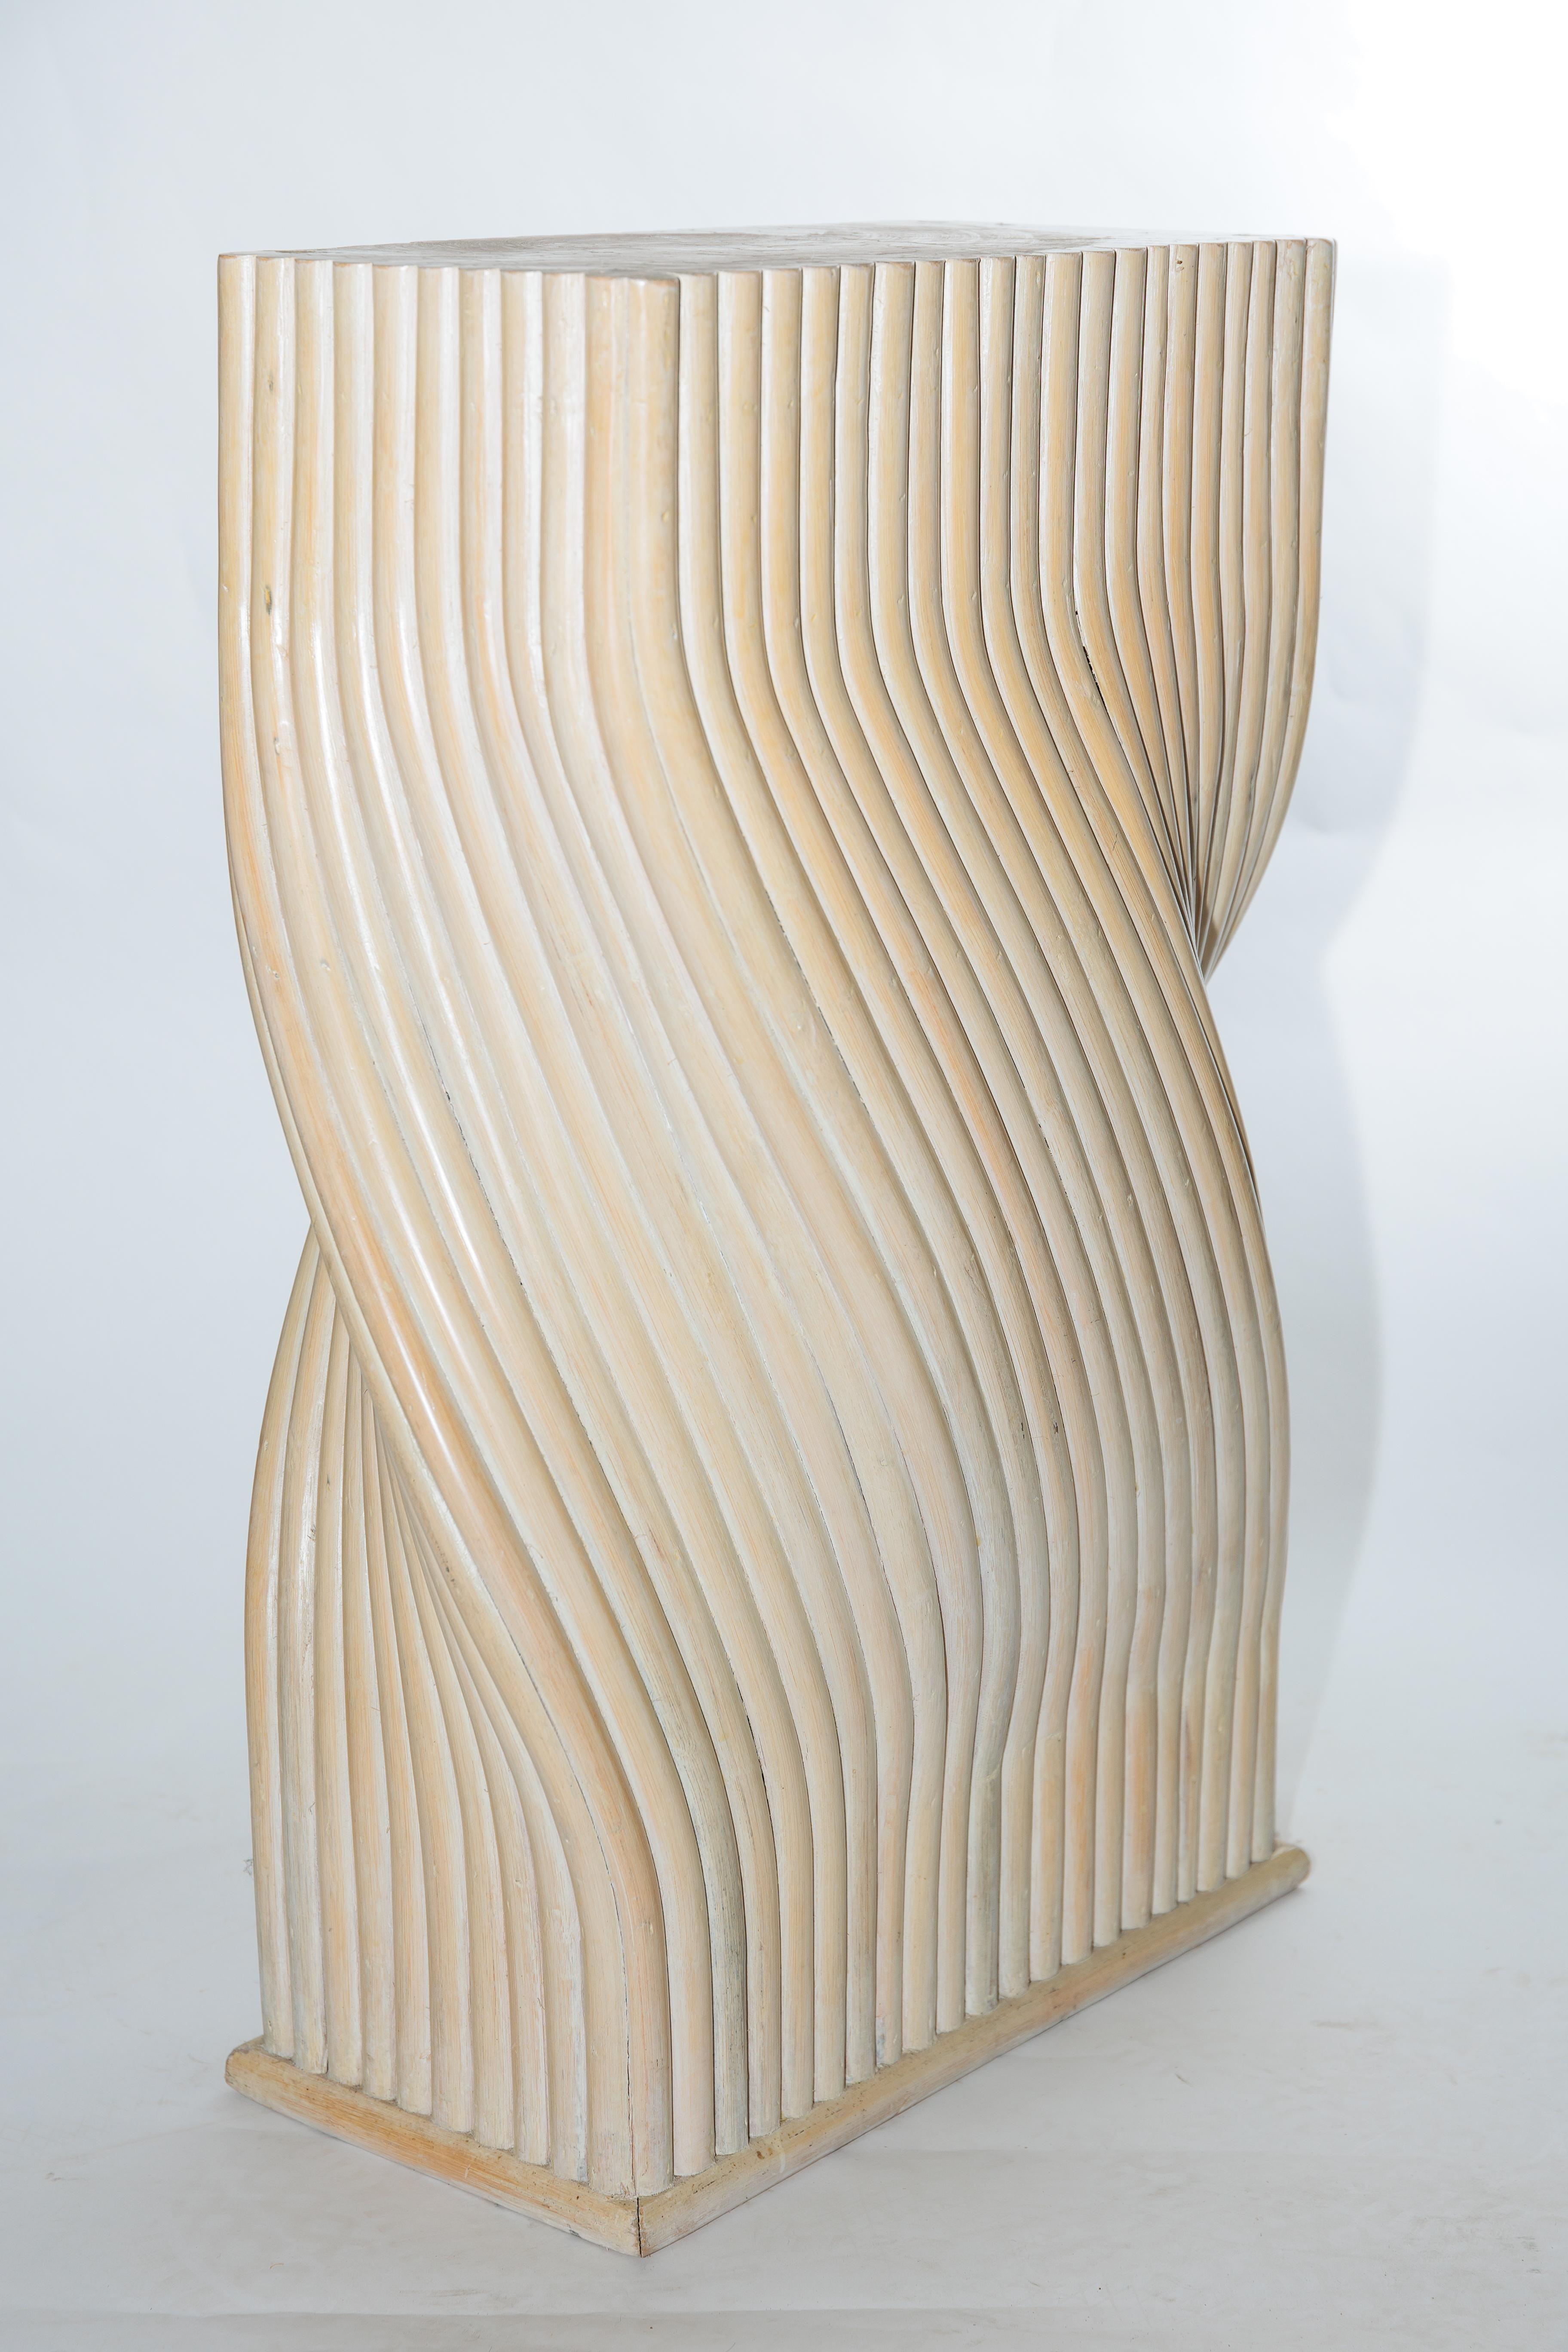 American Bamboo Pedestal Bases, by McGuire